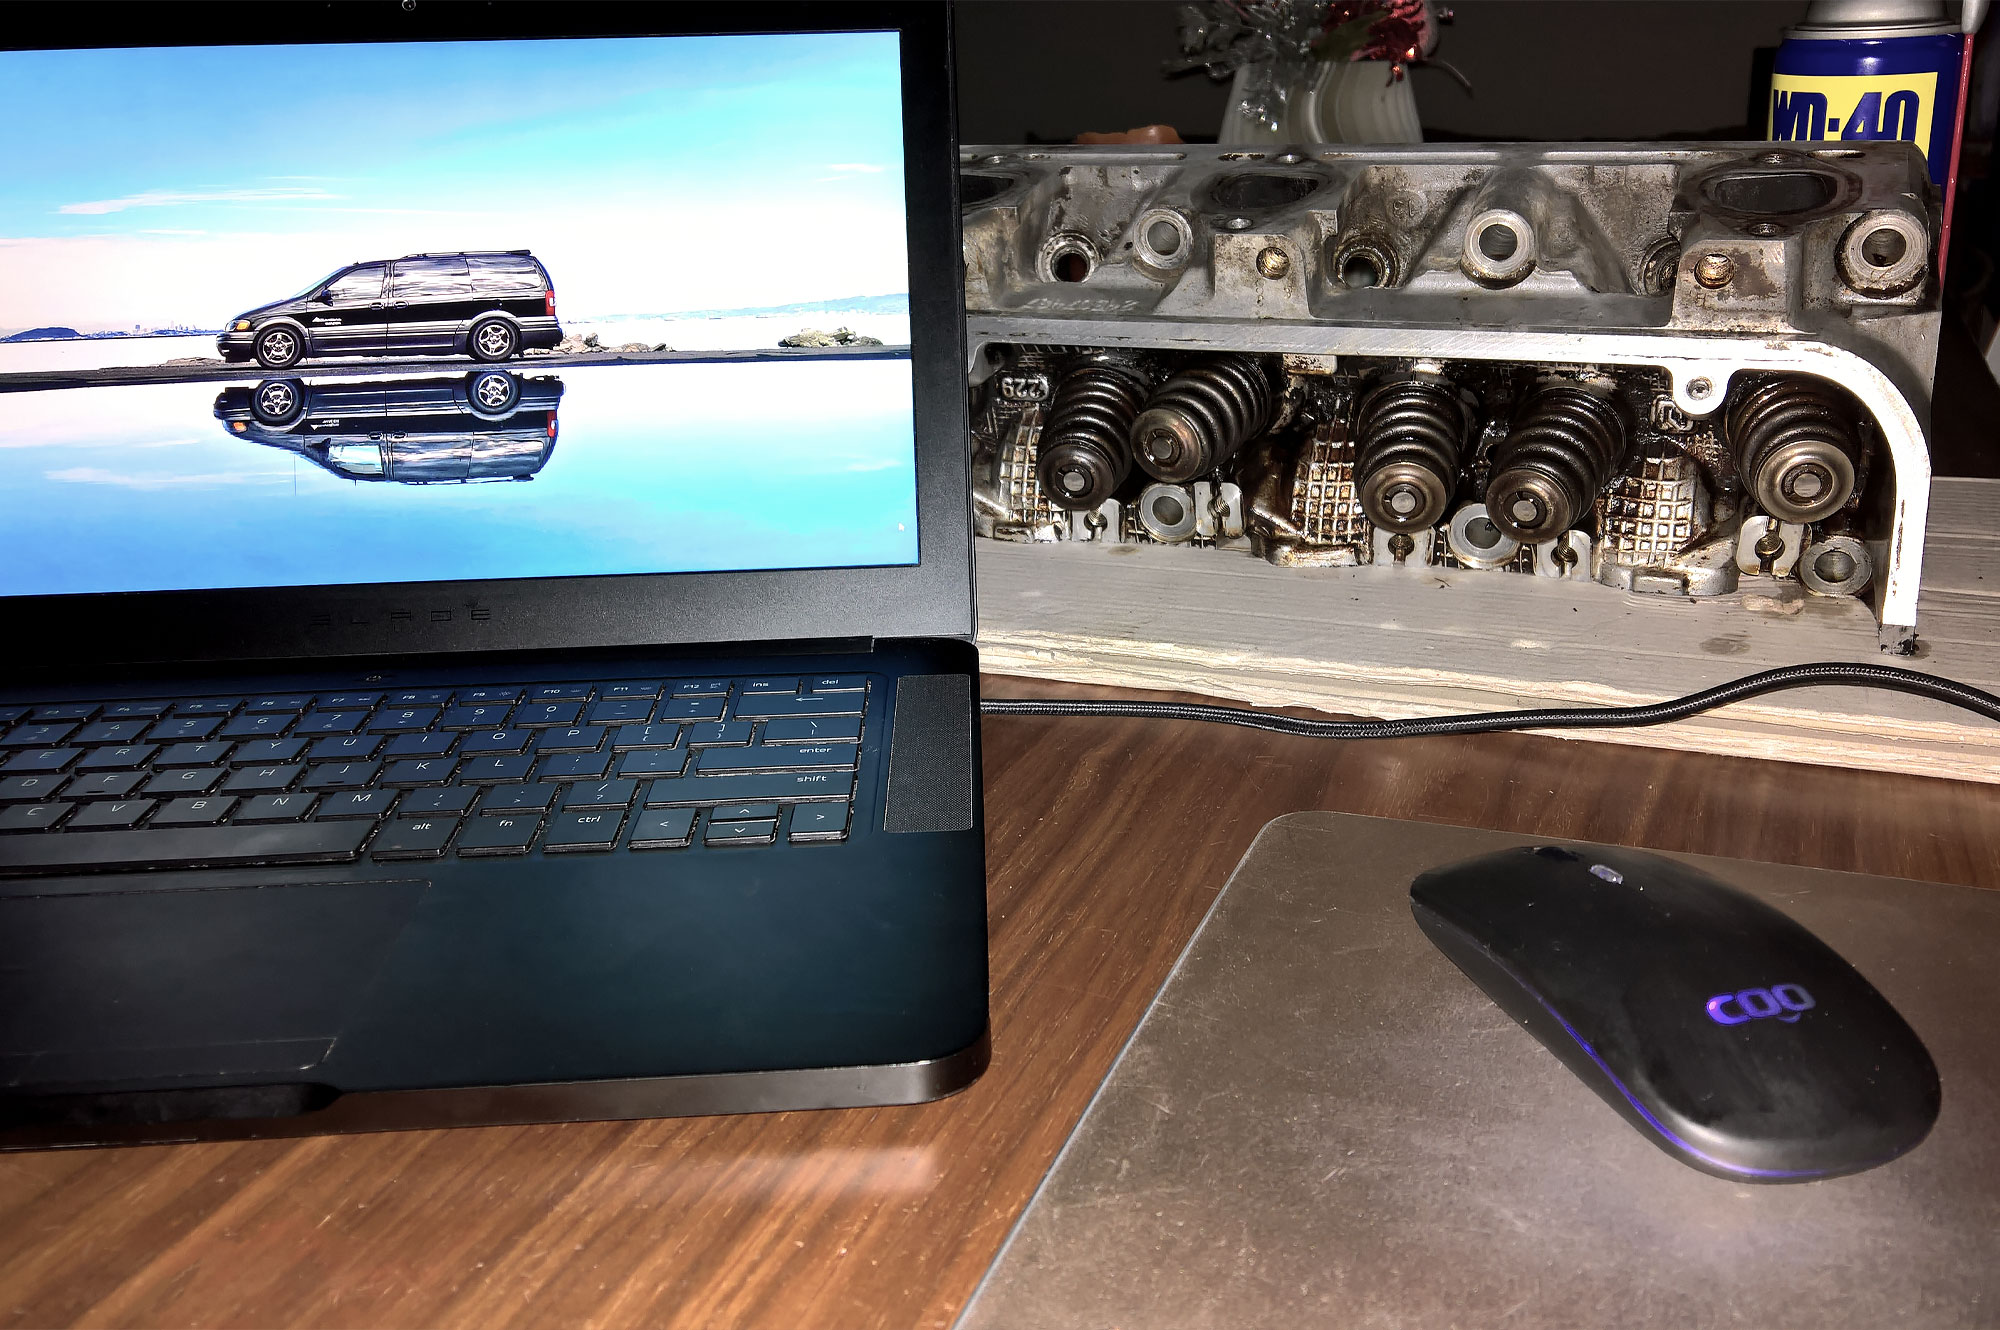 A photo of 2003 AWD Pontiac Montana Thunder shown on a screen of a 2016 Razer Blade laptop; next to the computer is one of the heads from the van.